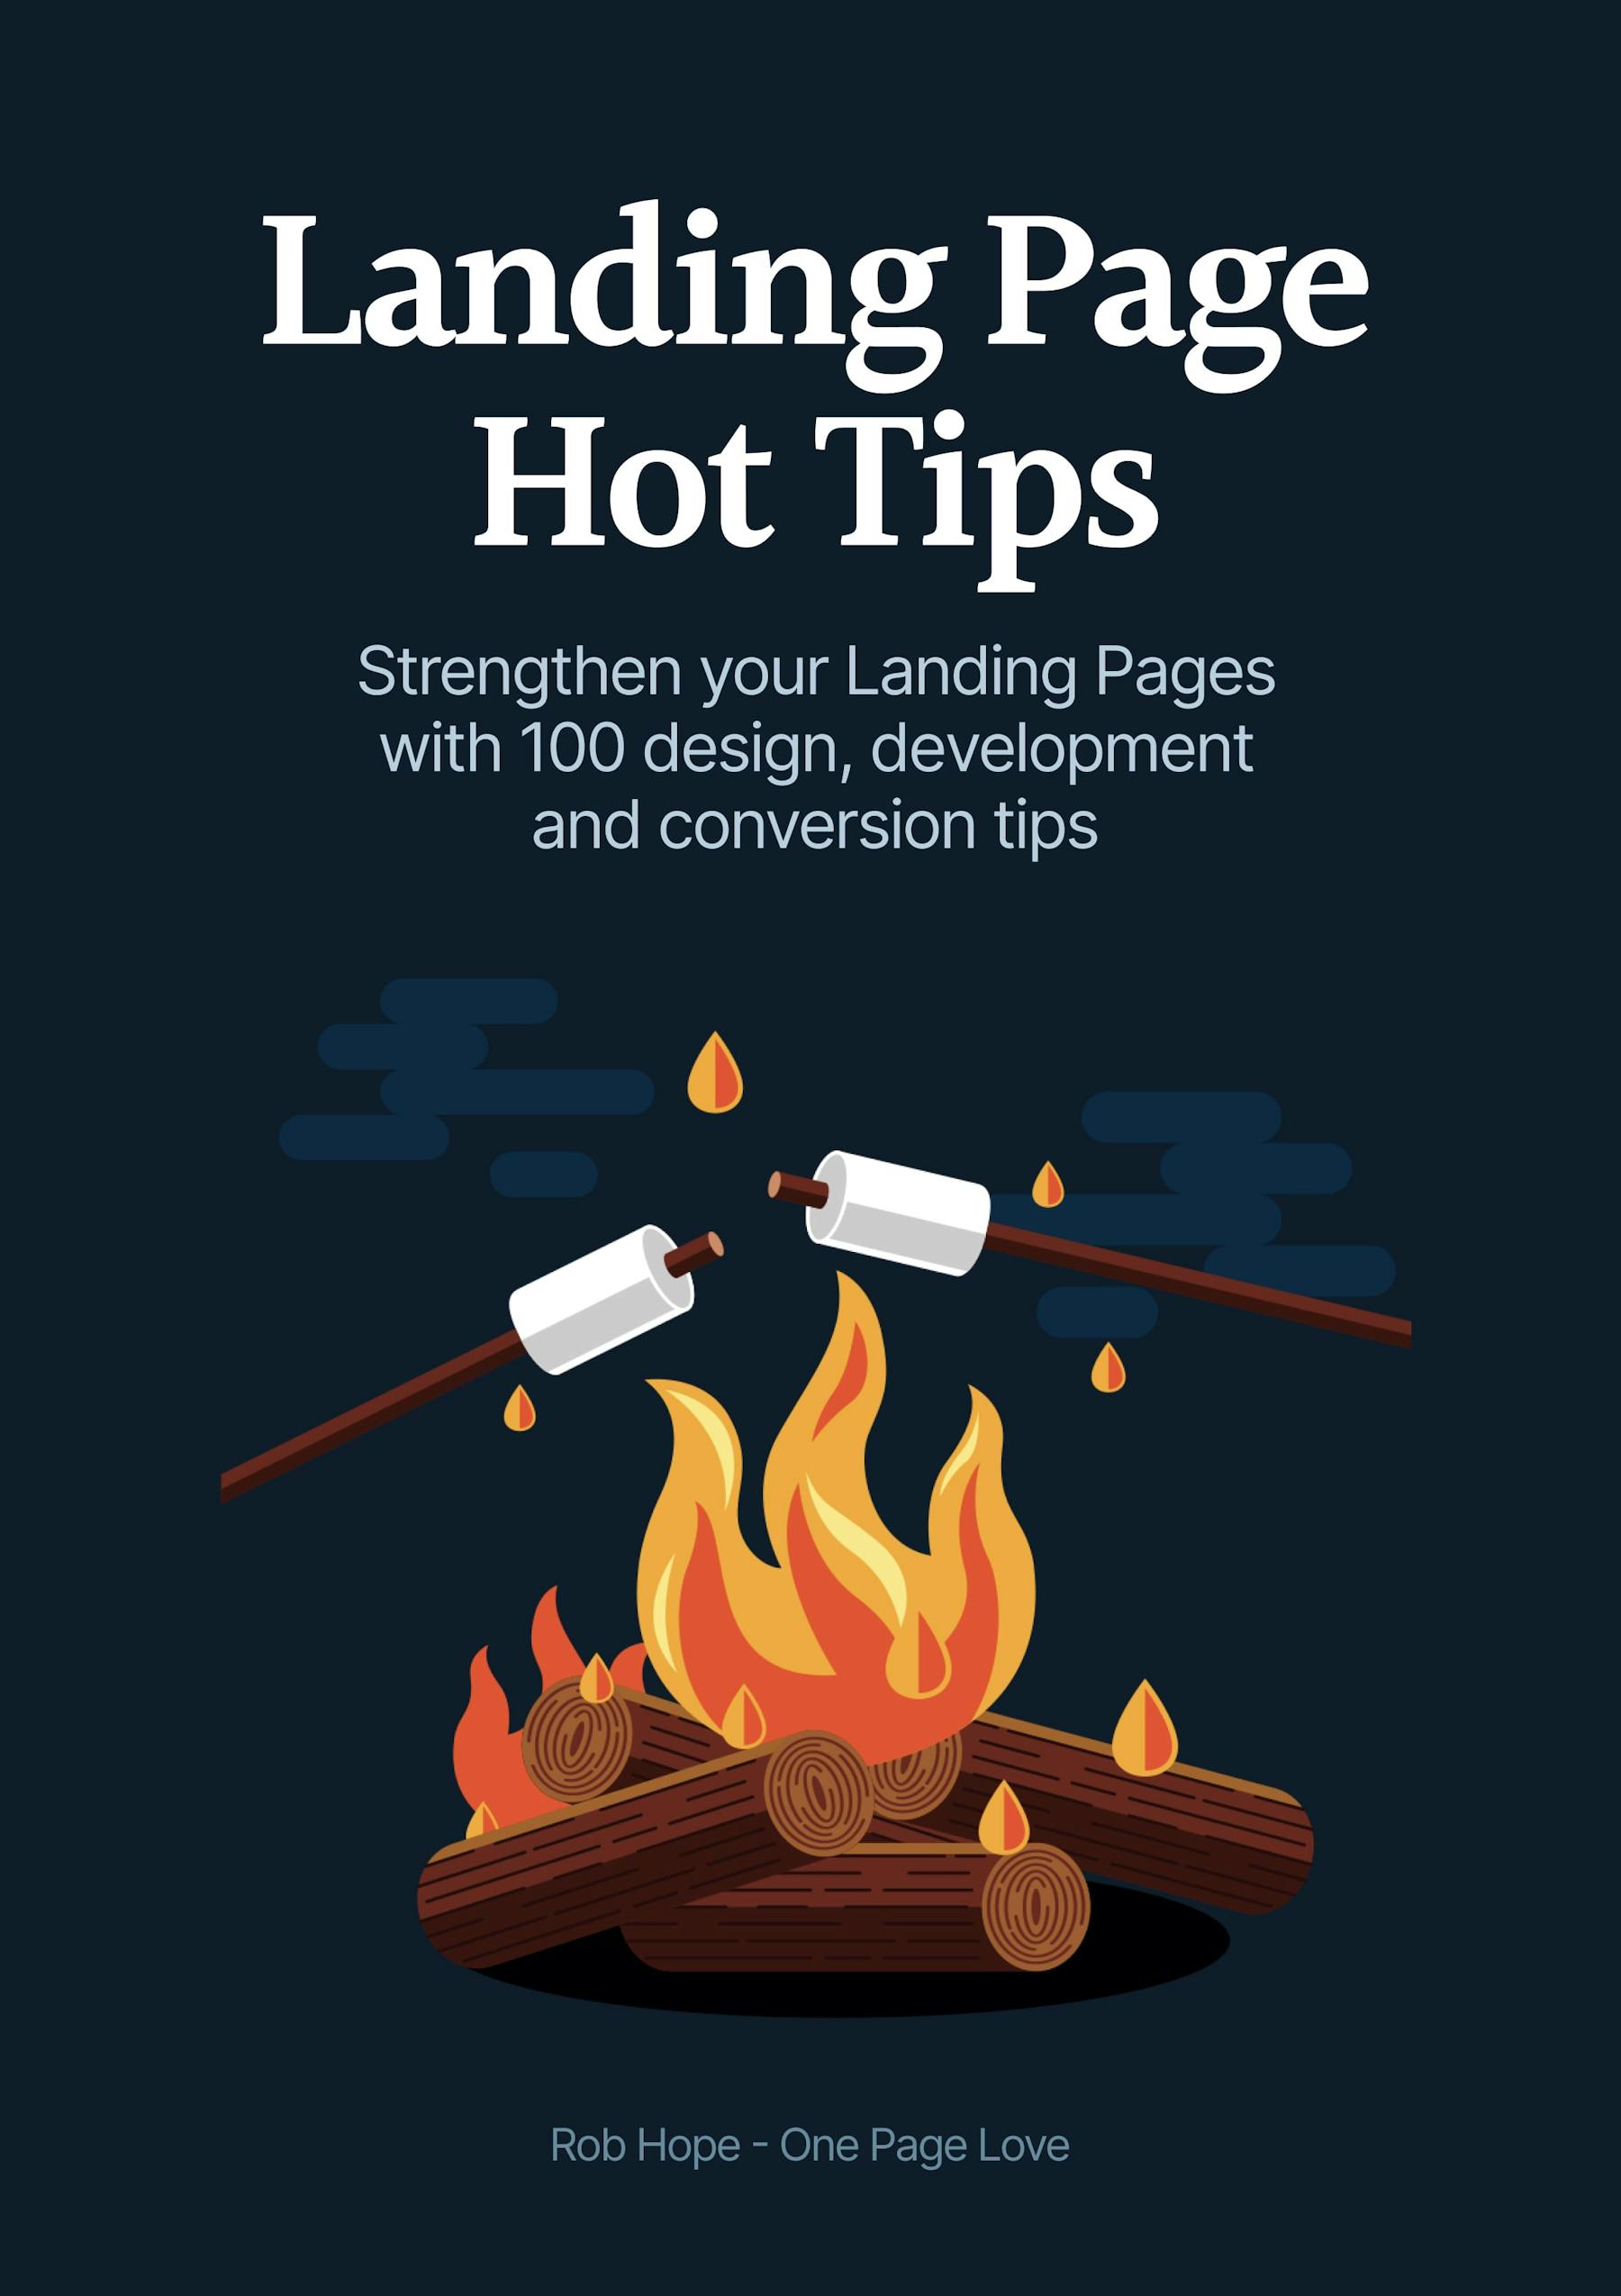 Landing Page Hot Tips by Rob Hope